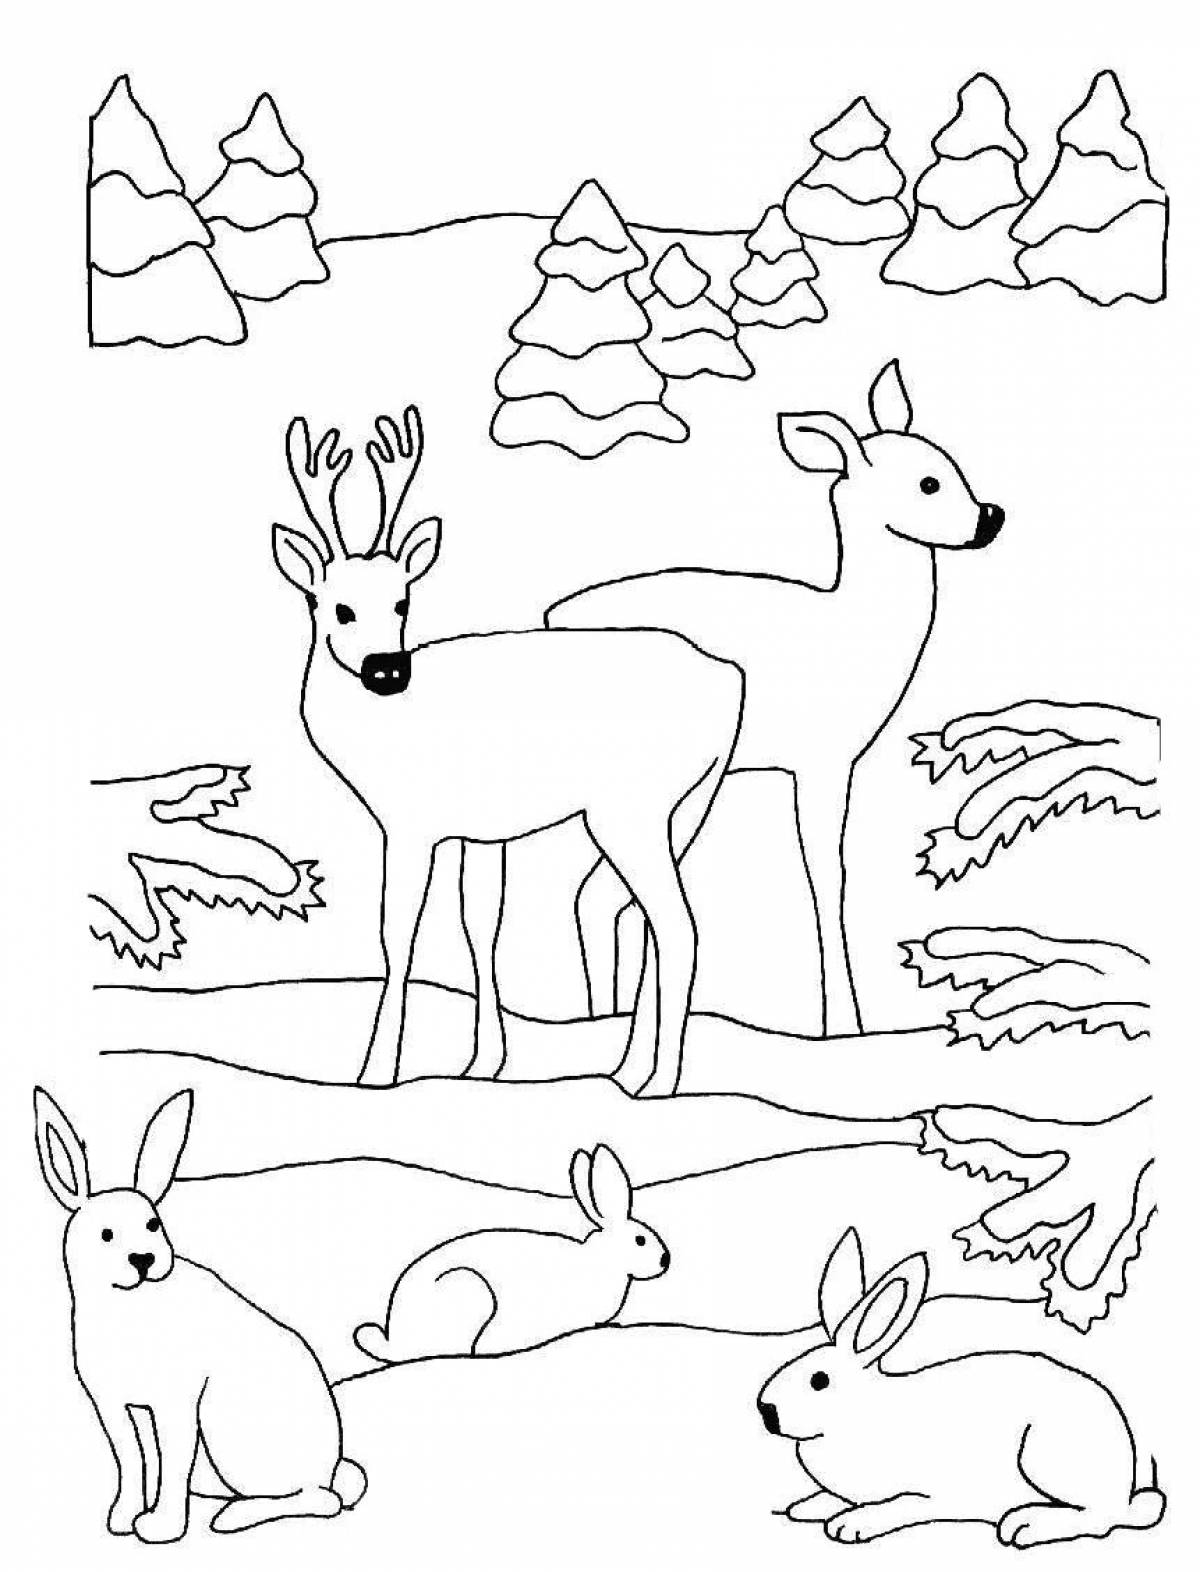 Andara coloring pages with crazy color